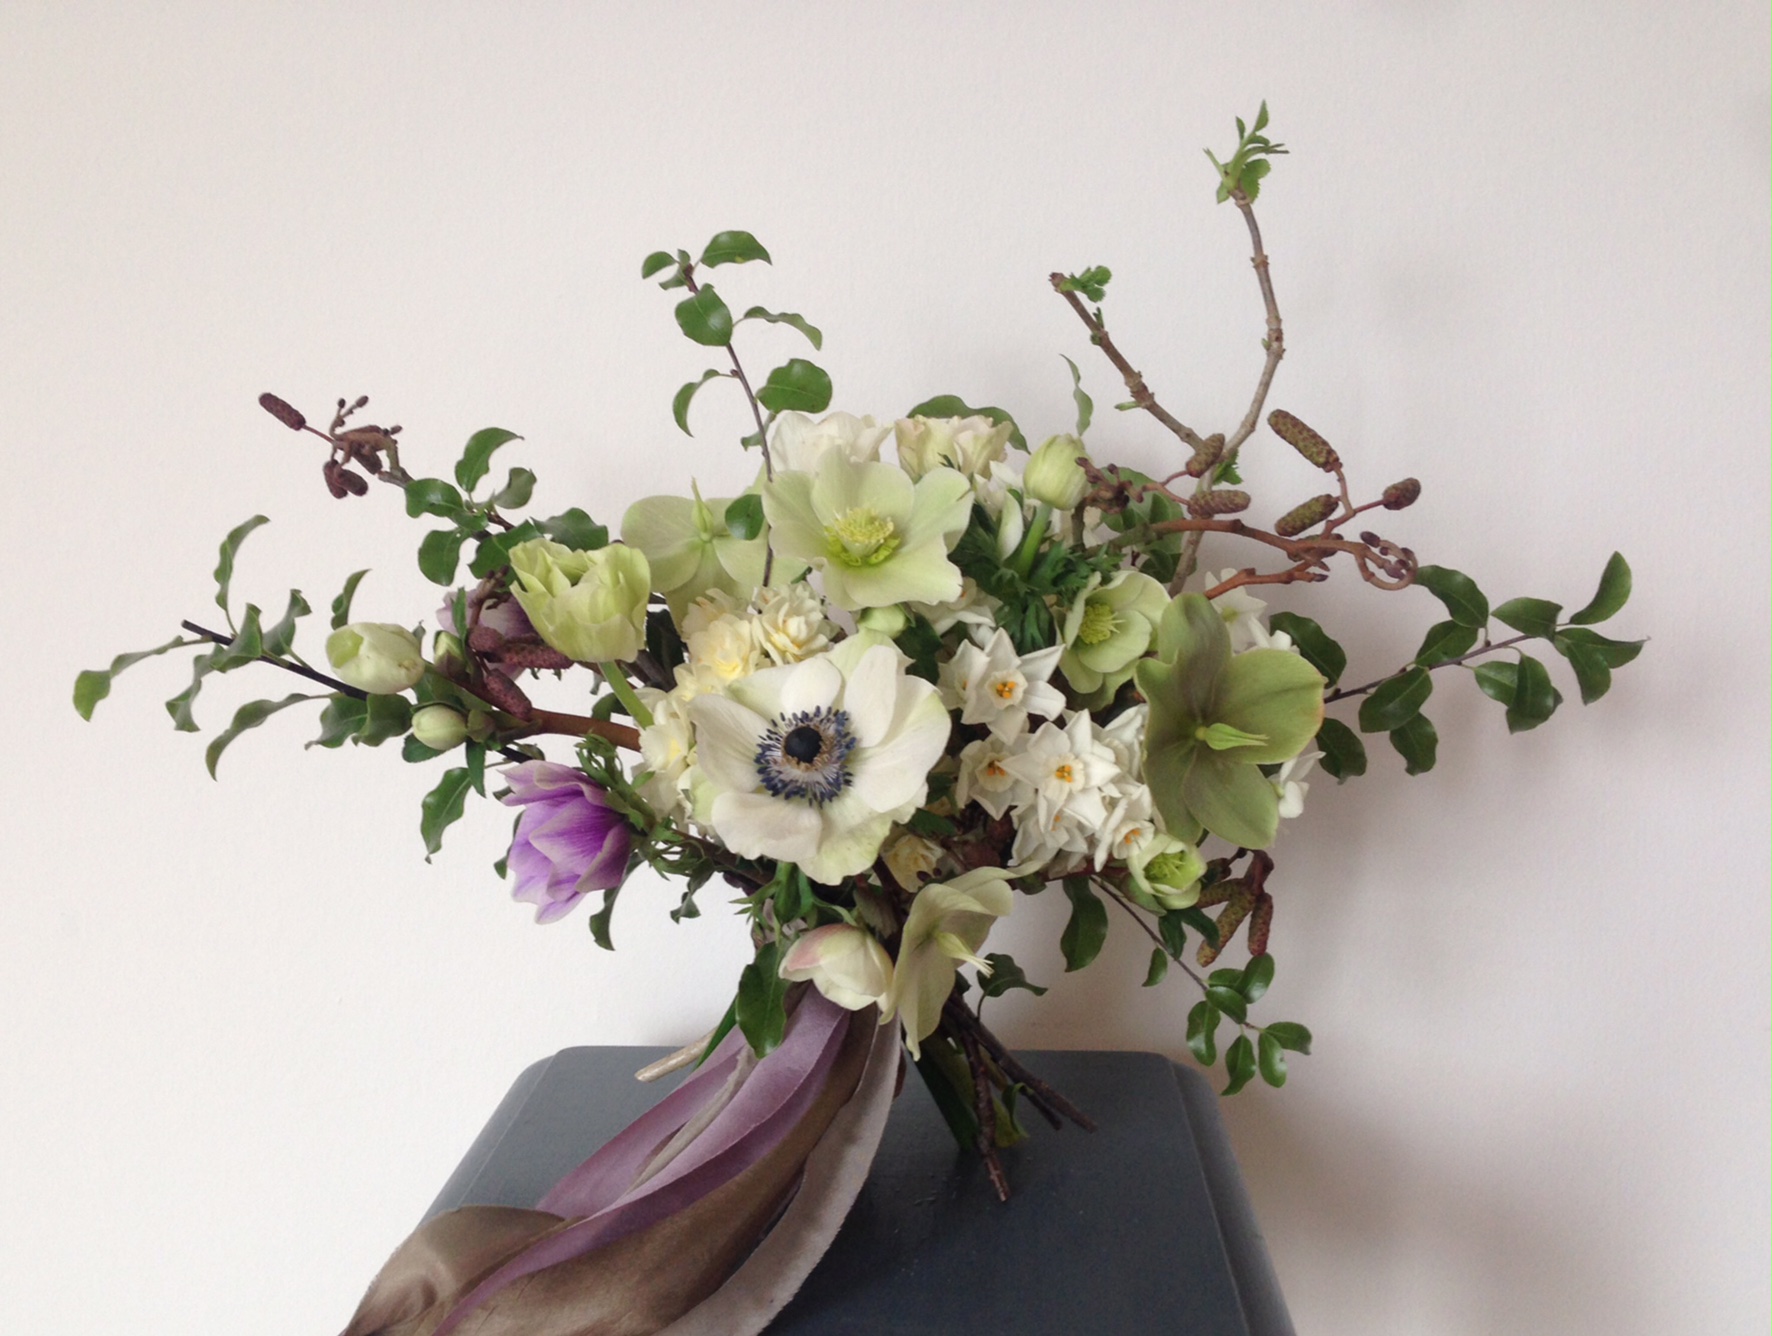 This British-grown bouquet includes anemone, hellebore, alder and paperwhite narcissi